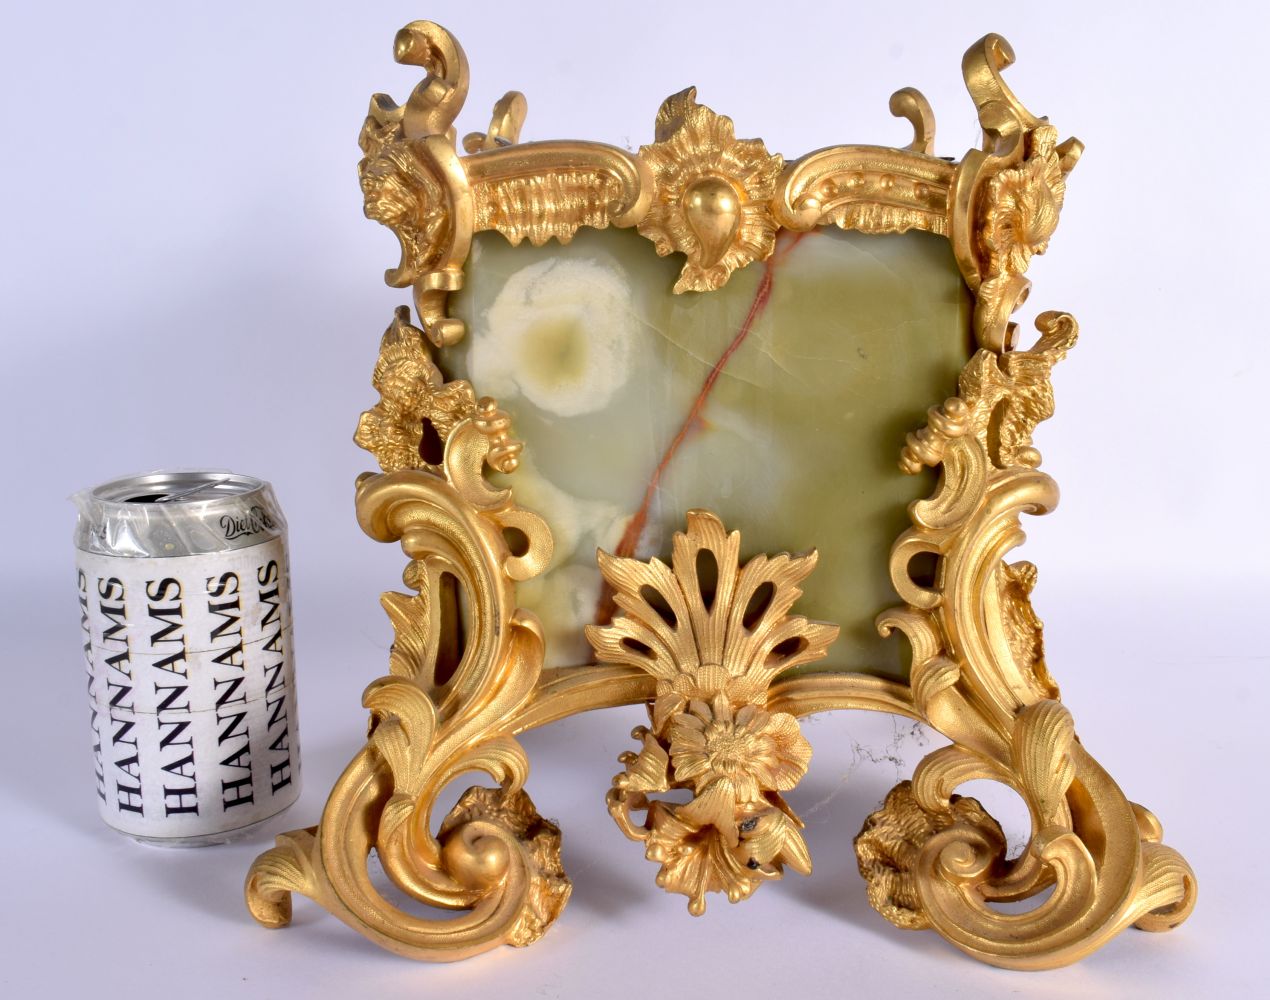 A FINE EARLY 20TH CENTURY FRENCH ORMOLU AND ONYX SQUARE FORM VASE overlaid with foliage and vines. 2